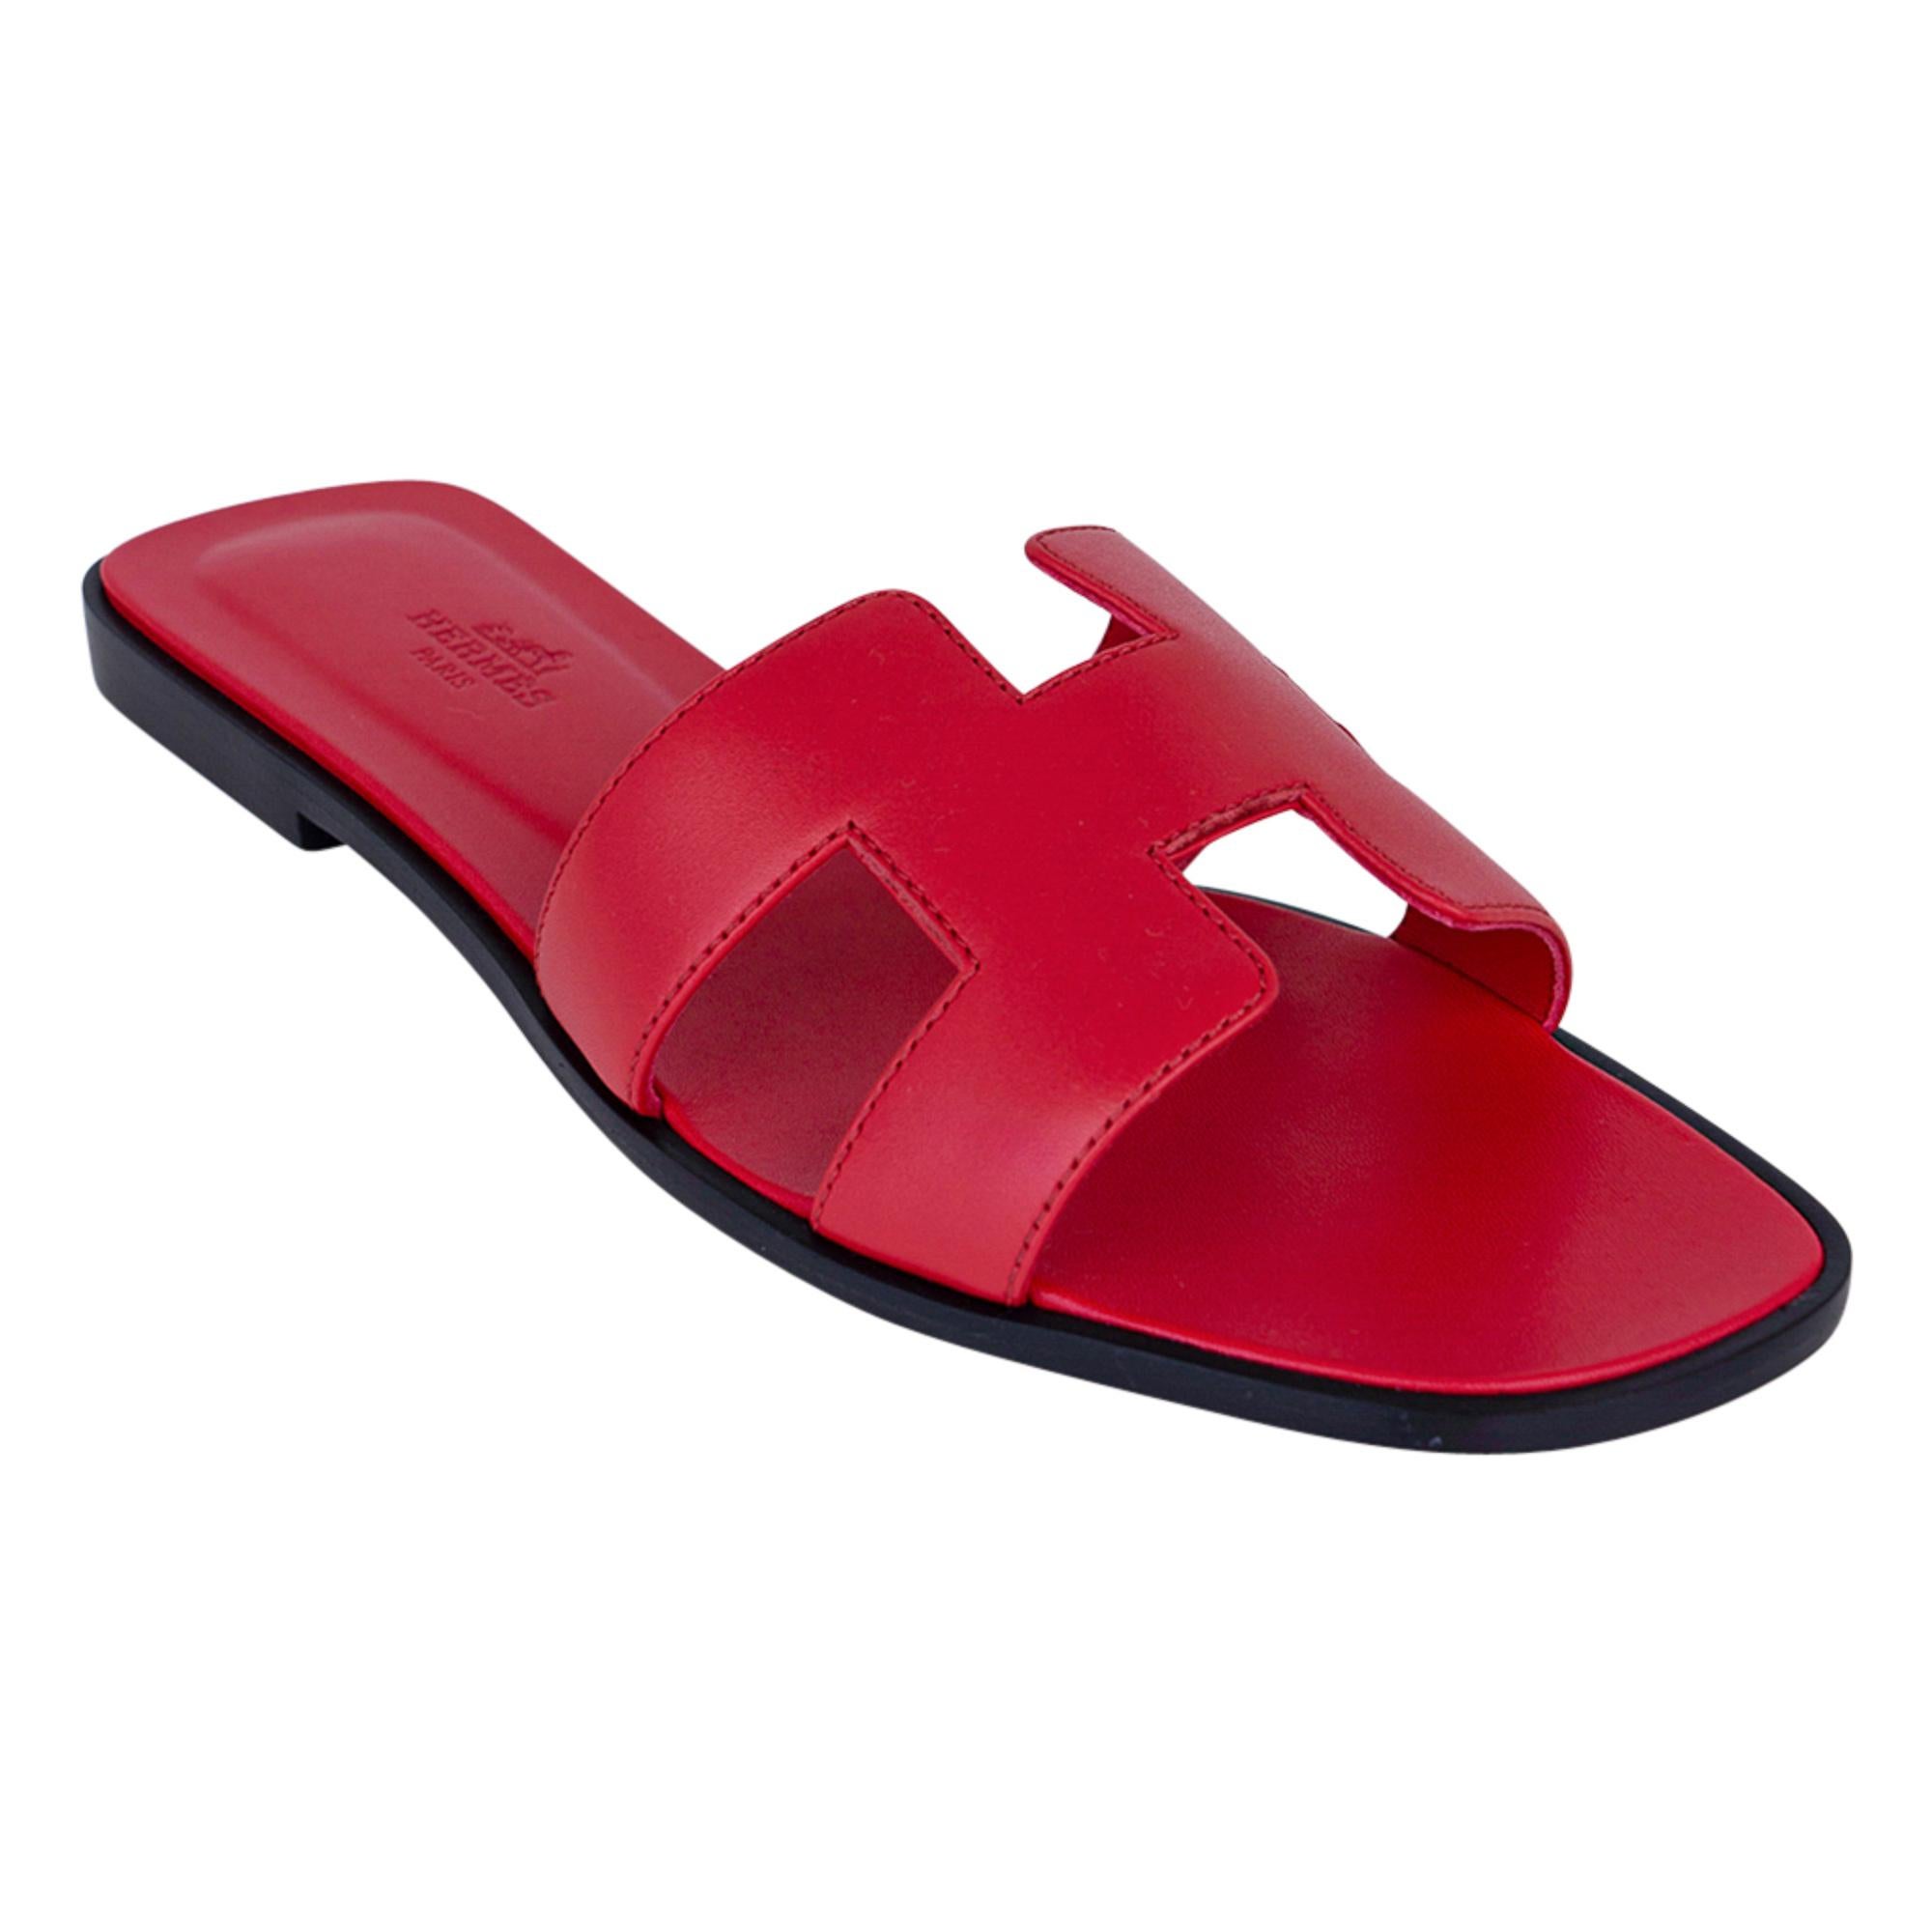 Guaranteed authentic Hermes Oran vibrant Rose Cotinga pink flat sandal.
These rich, saturated pink slides are a must for foot flirting!
Hermes Paris embossed leather insole. 
Wood heel with leather sole. 
Comes with sleepers and and signature Hermes